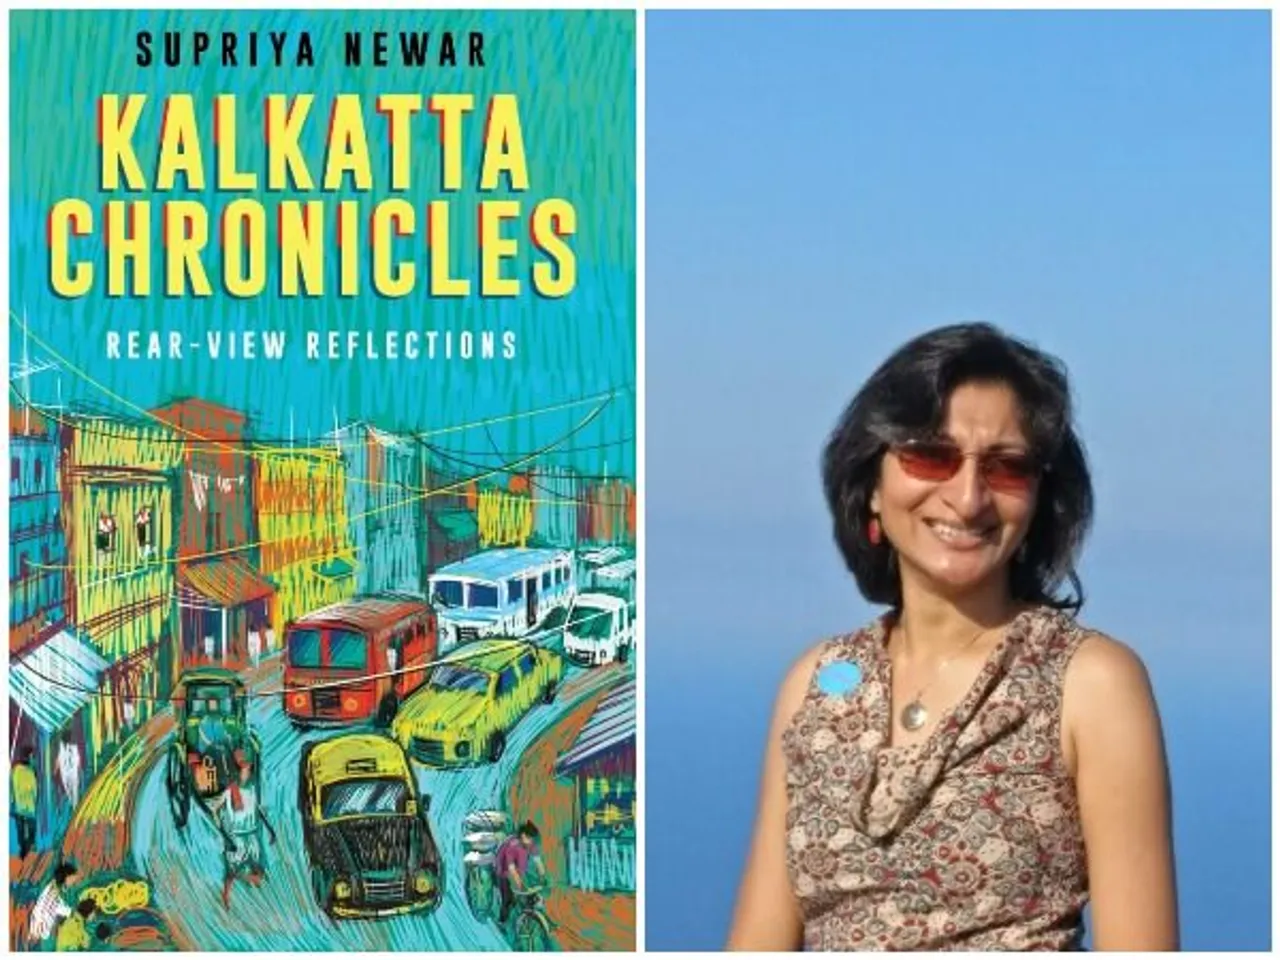 Relive The Nostalgic Train Rides With Kalkatta Chronicles: An Excerpt